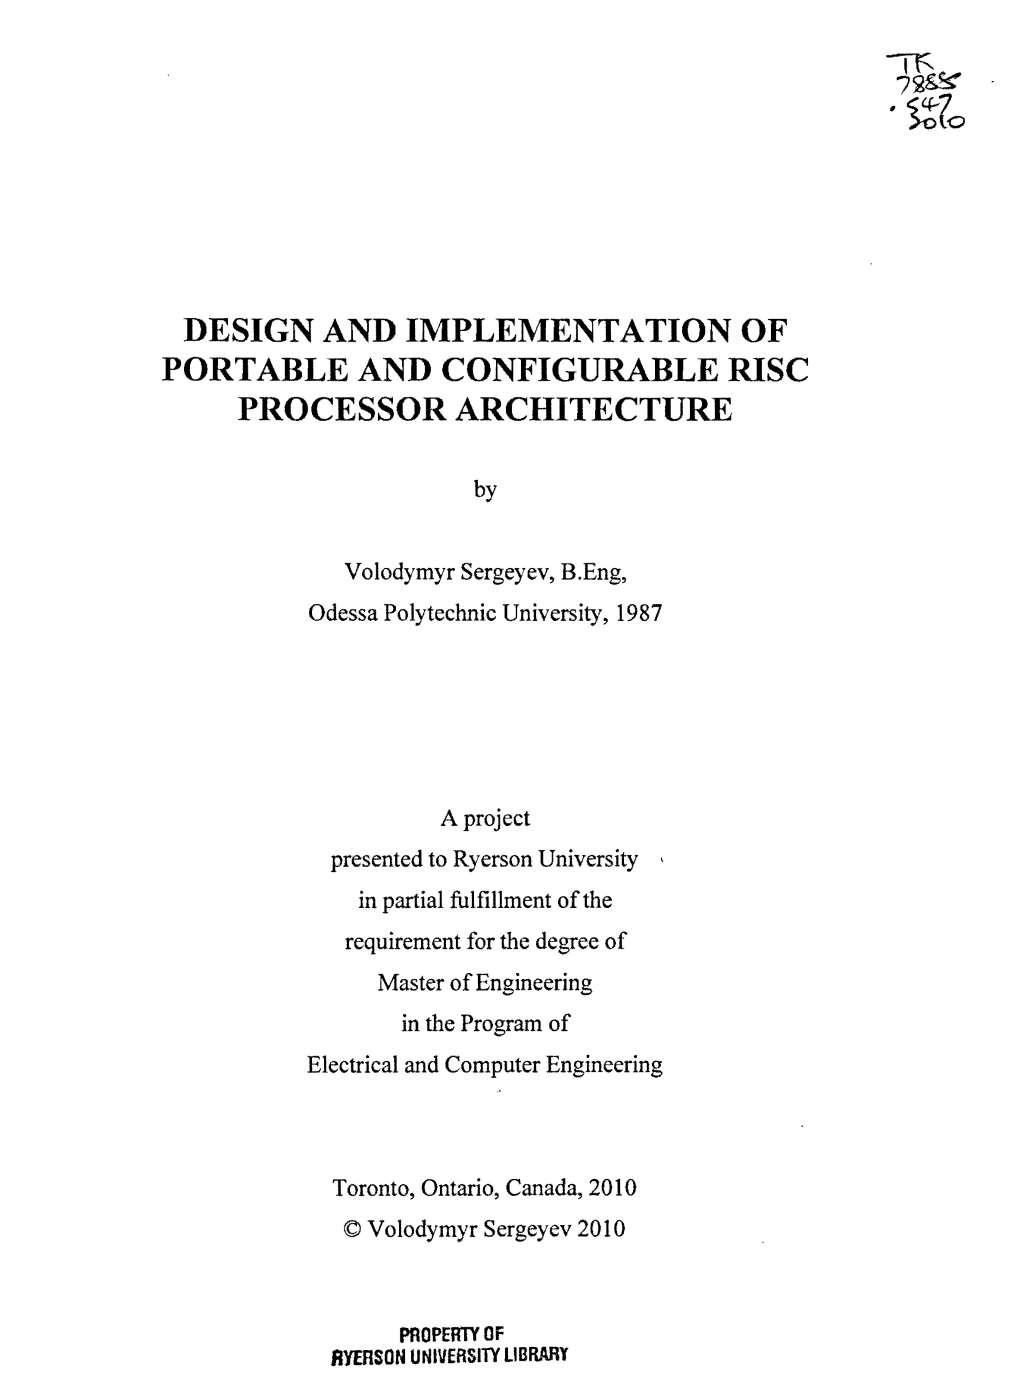 Design and Implementation of Portable and Configurable Risc Processor Architecture